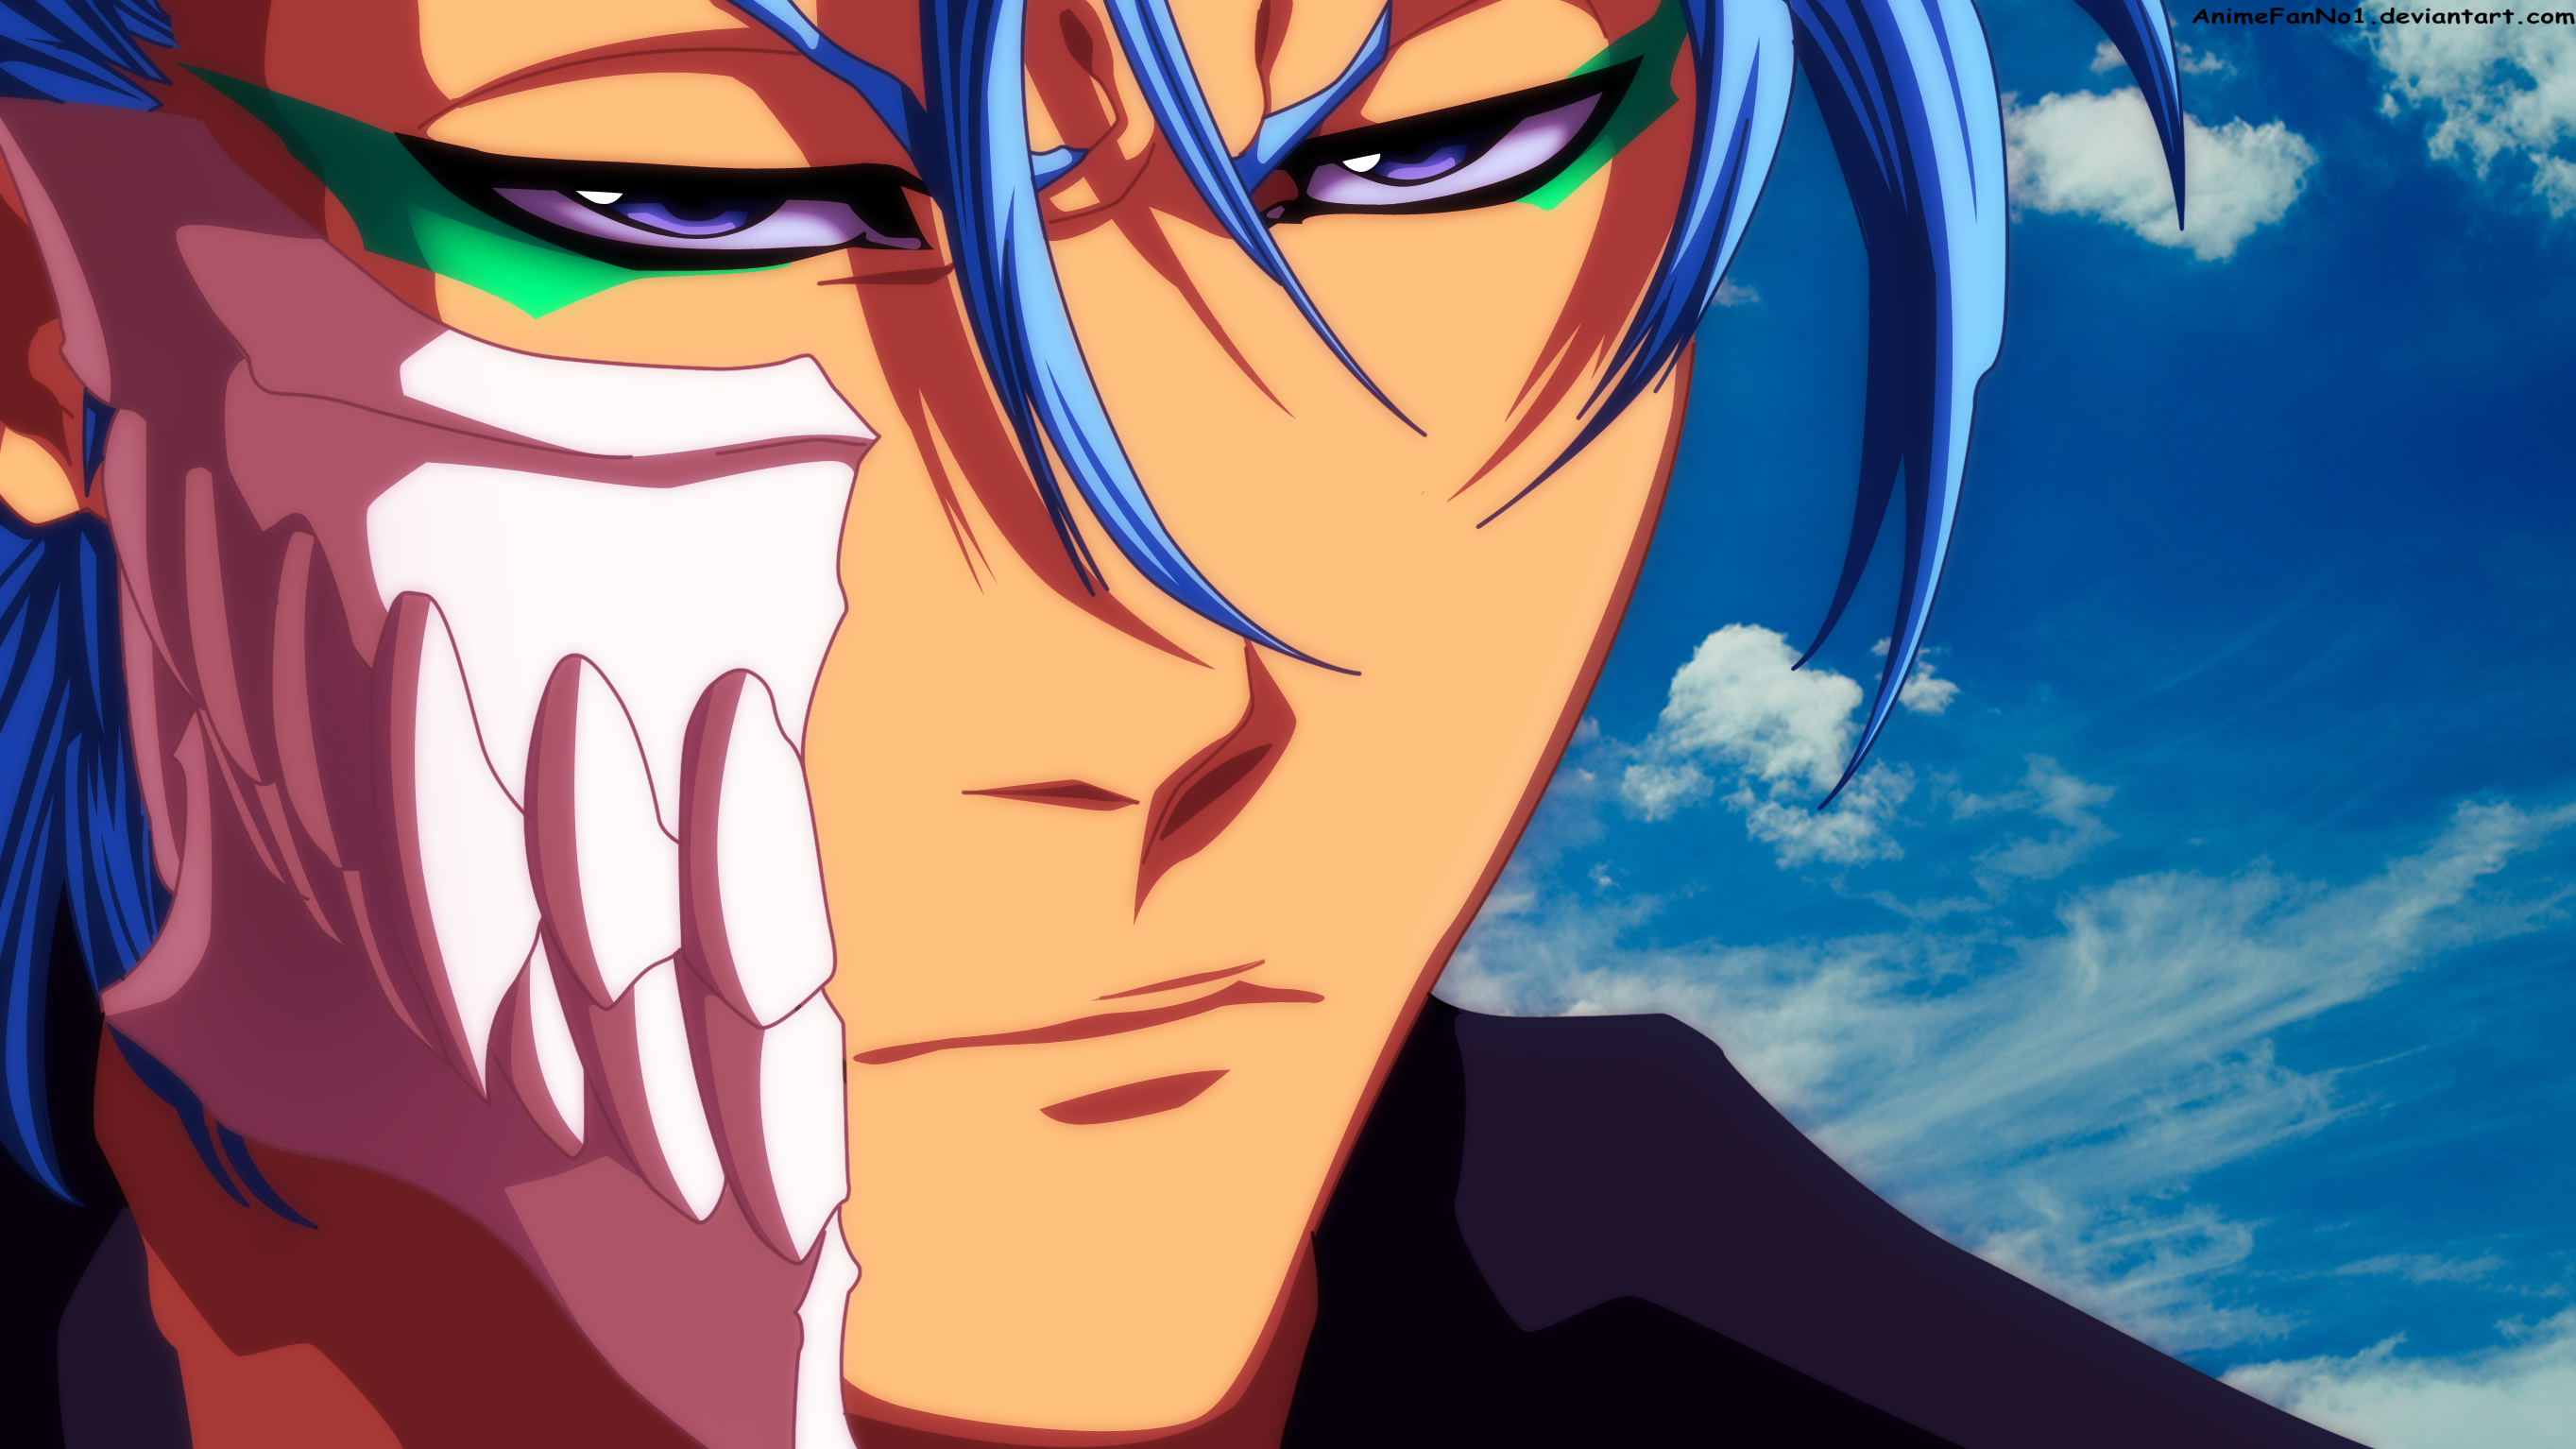 Bleach 624 Grimmjow Is Back By Animefanno1 Daily Anime Art